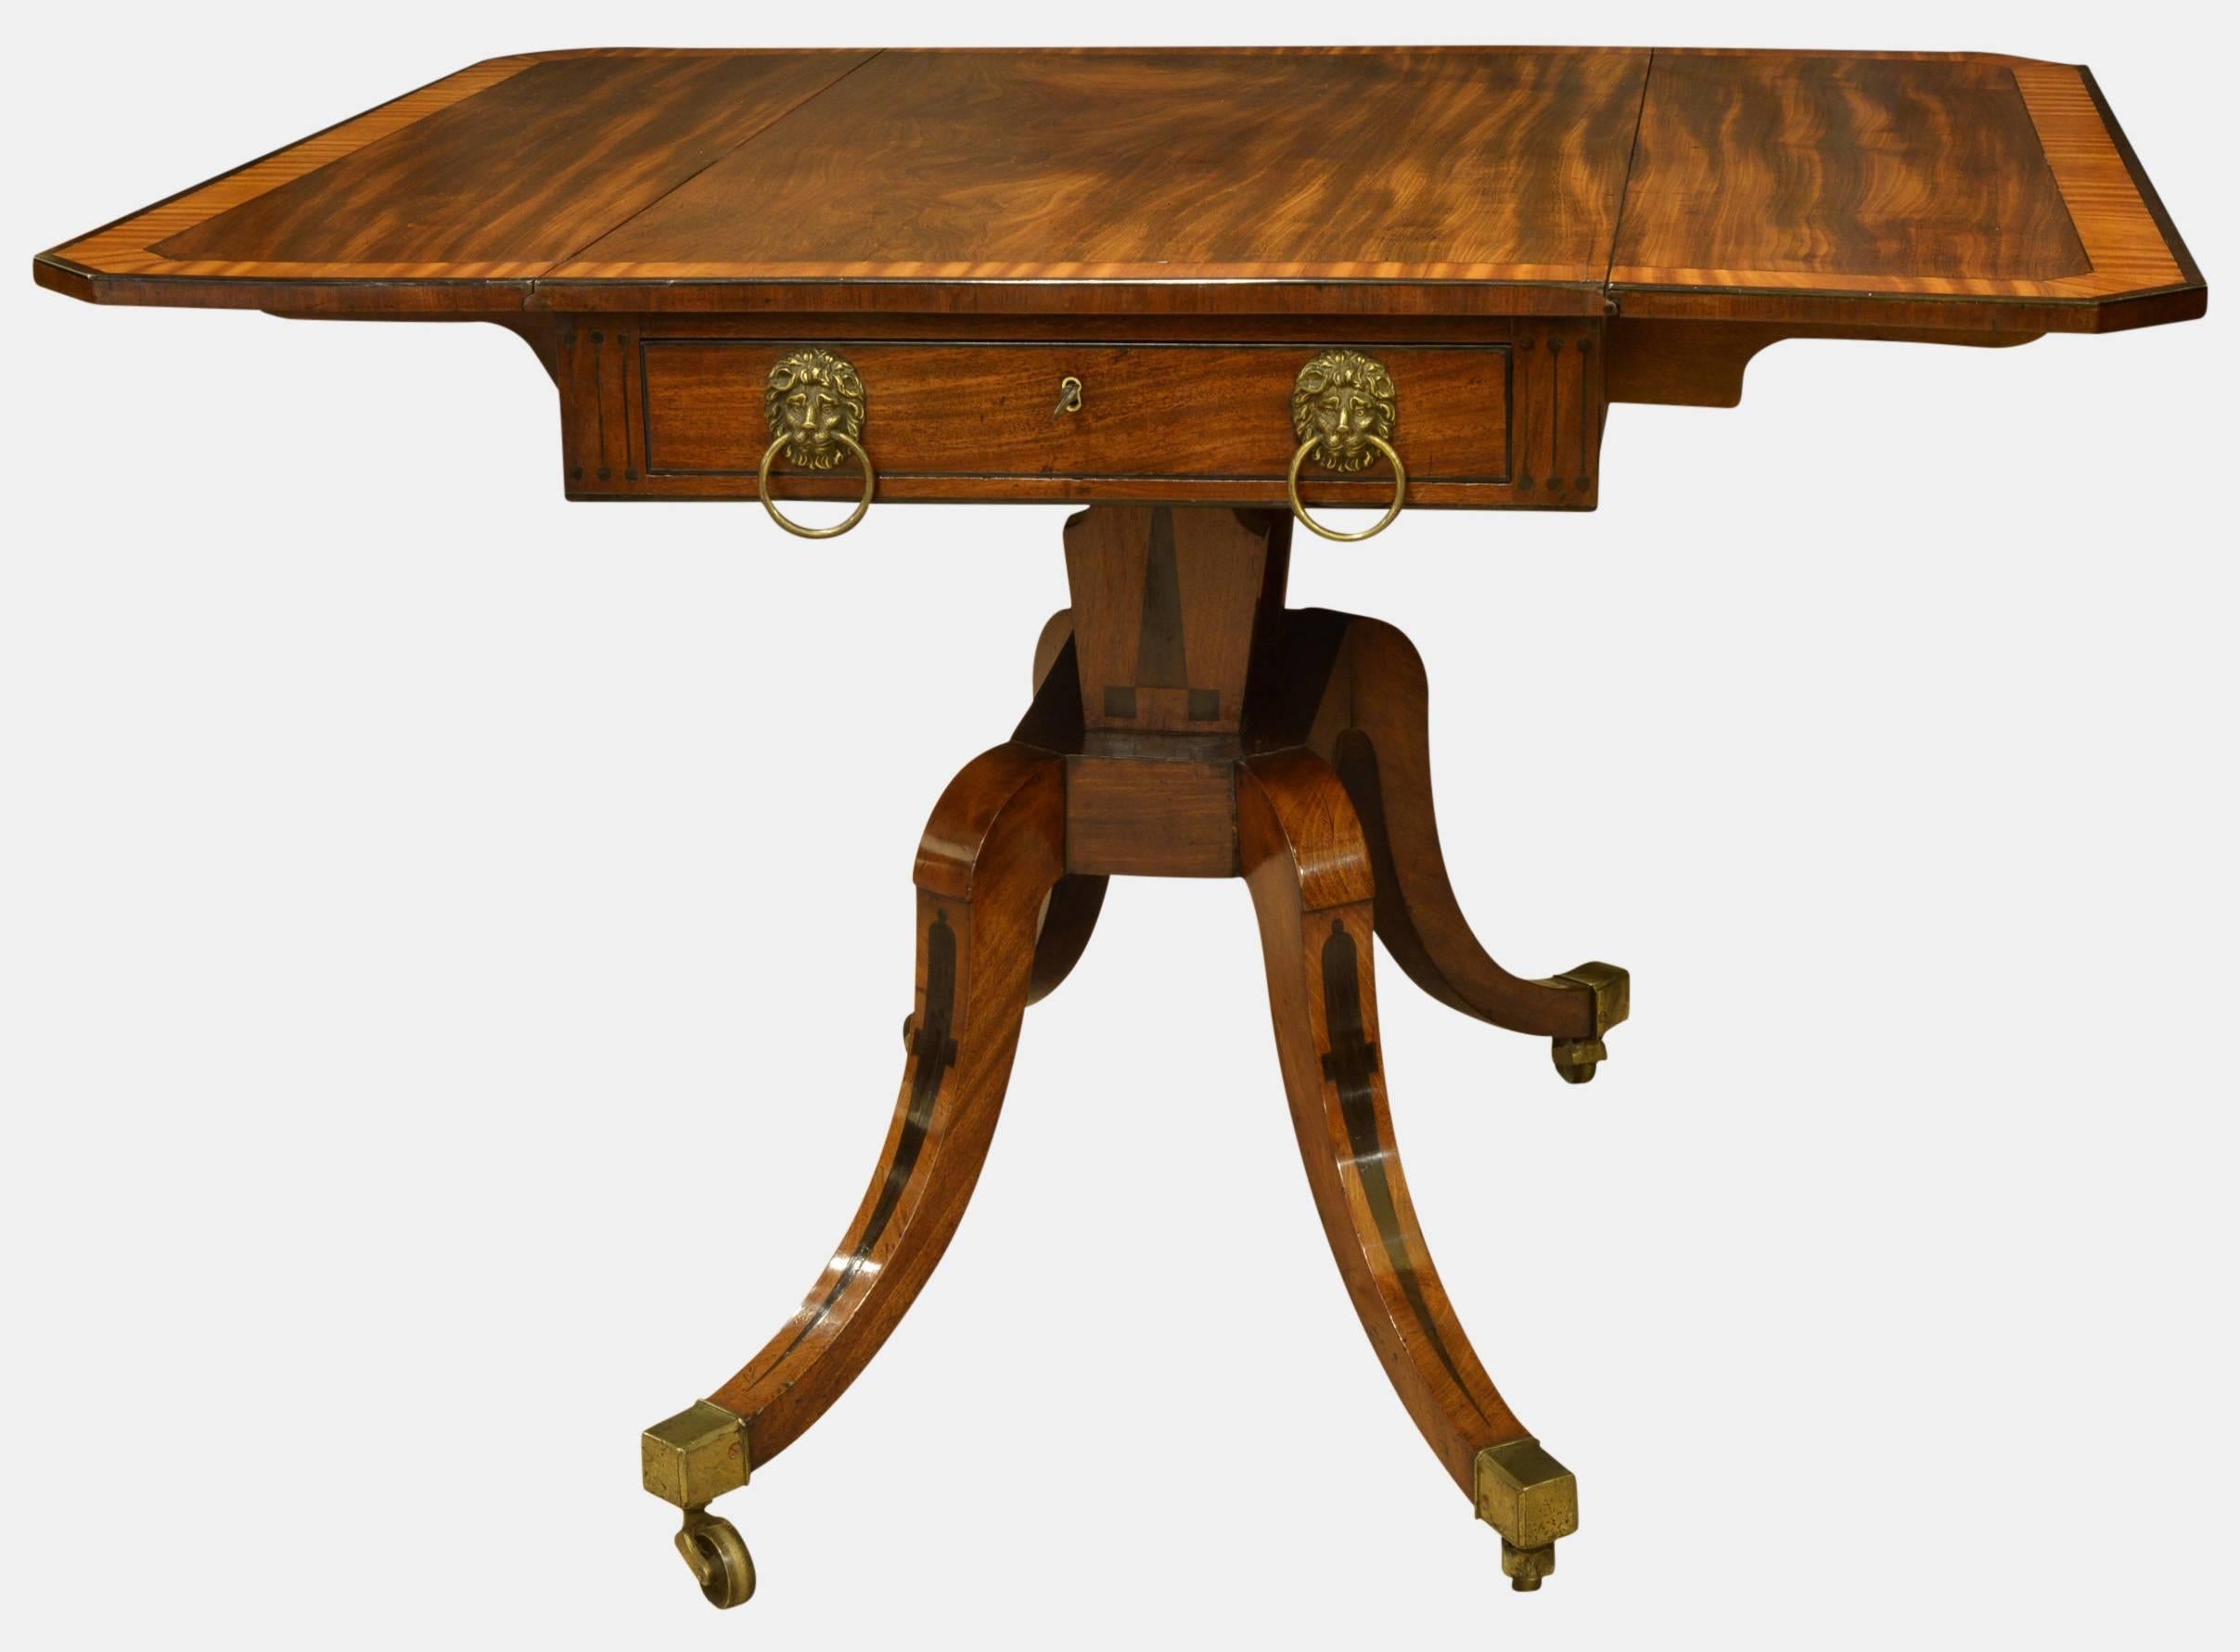 Elegant English Regency pedestal pembroke table. In mahogany, crossbanded in satinwood. Inlaid throughout with ebony, almost certainly attributed to George Oakley. Twin drawers with lion handles,

circa 1810.

Measure: 73cm (28.7